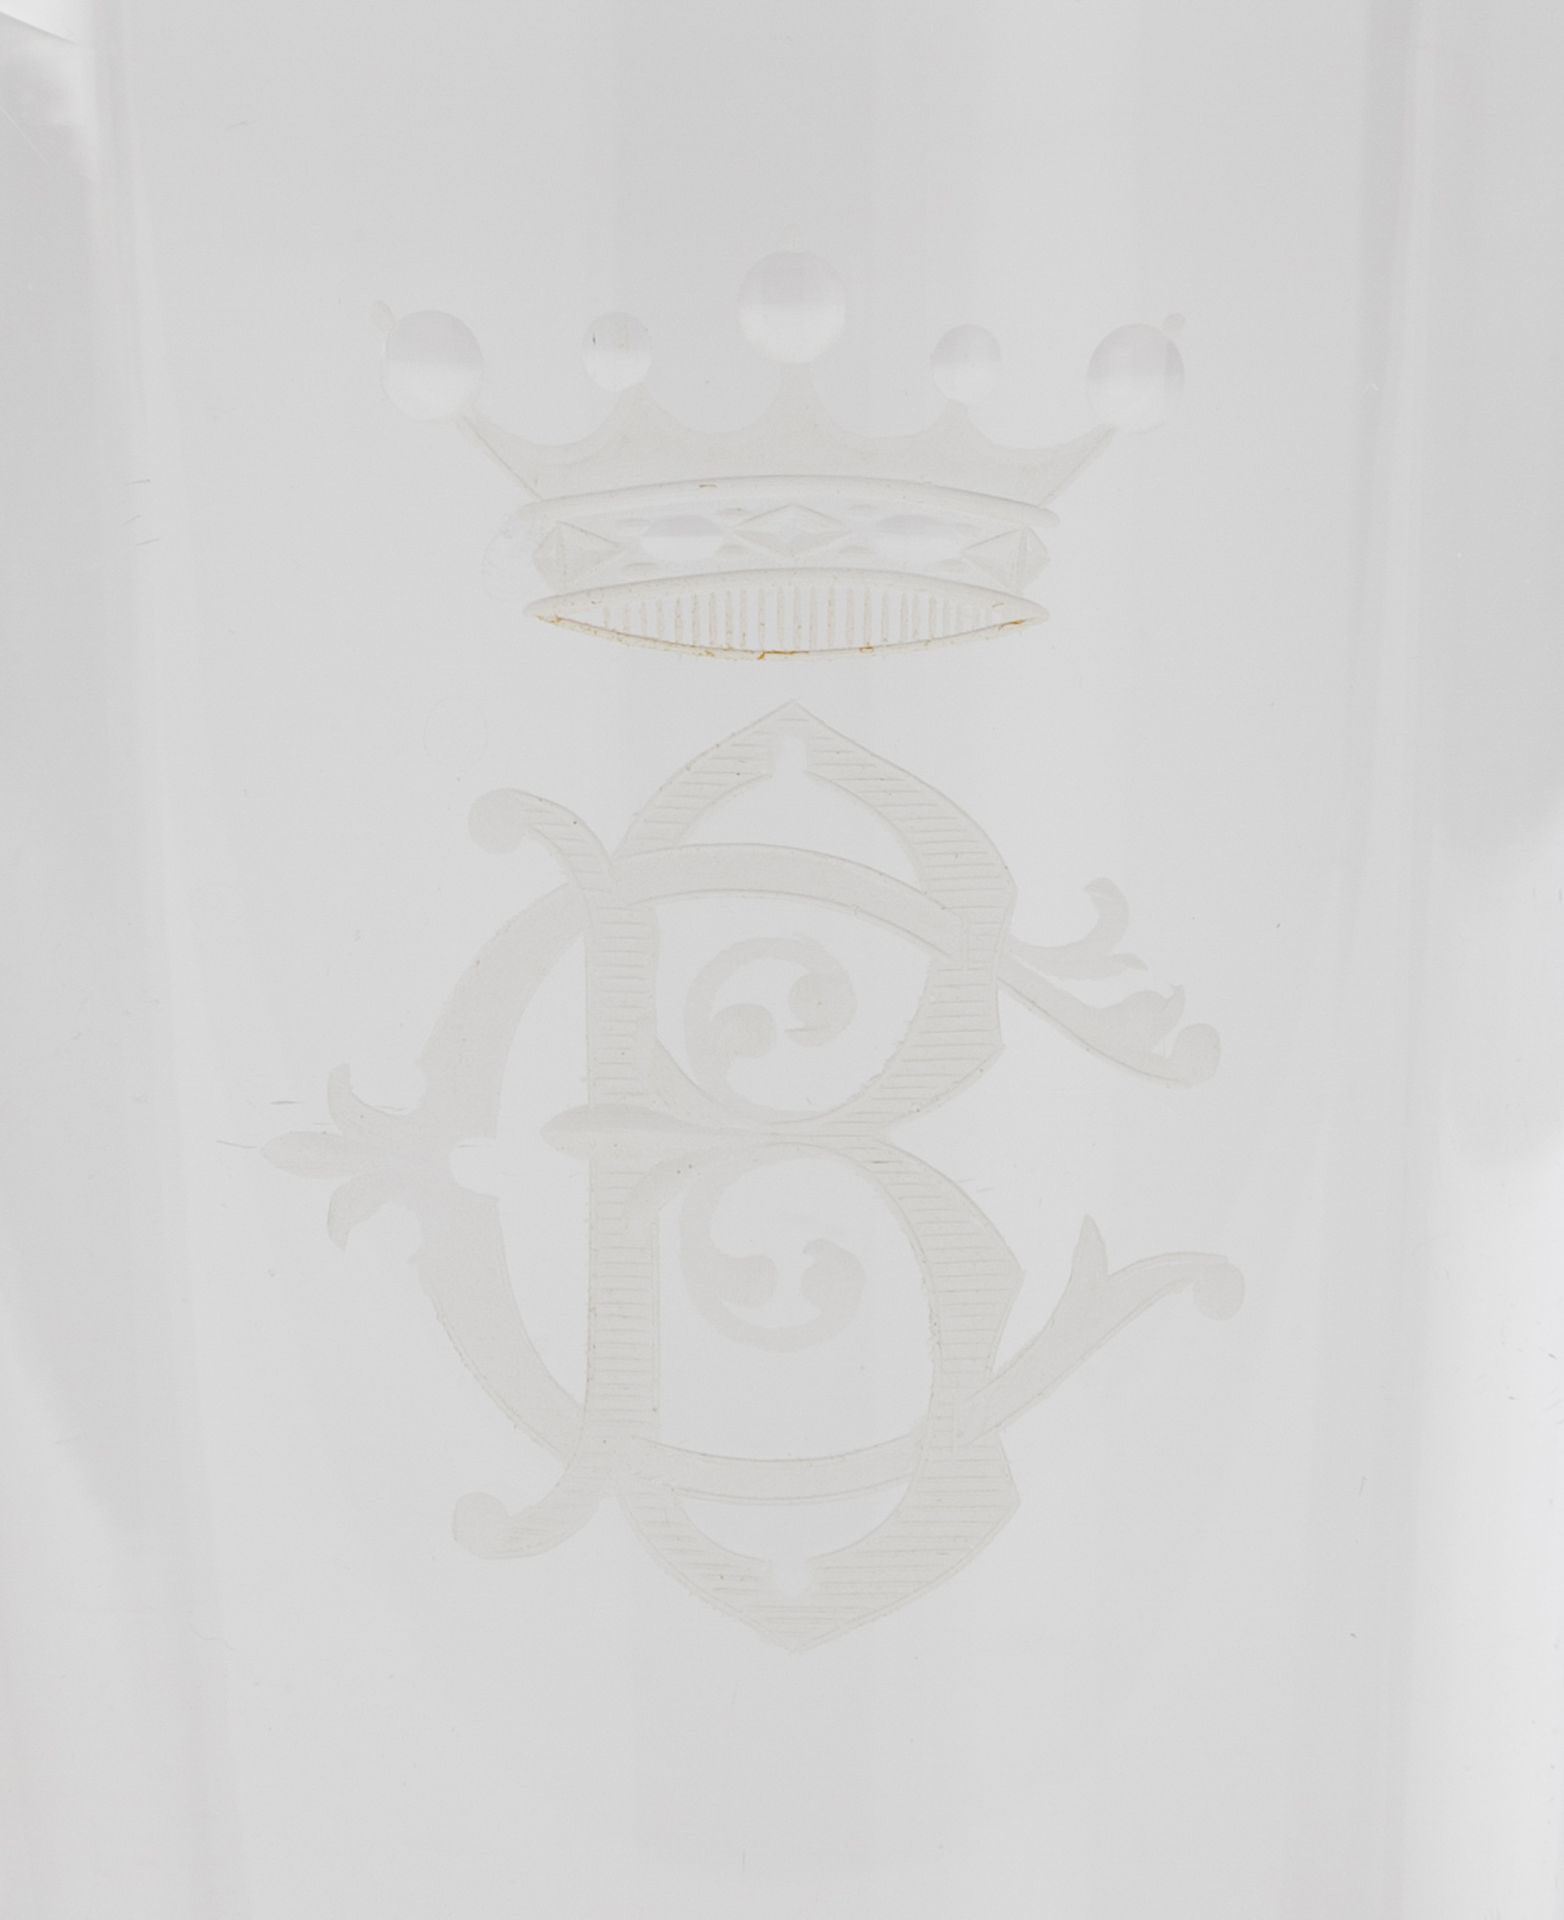 A part of a table glass setMonogramed crystal with viscount coronet 7 water glasses, 12 white wi - Image 3 of 3